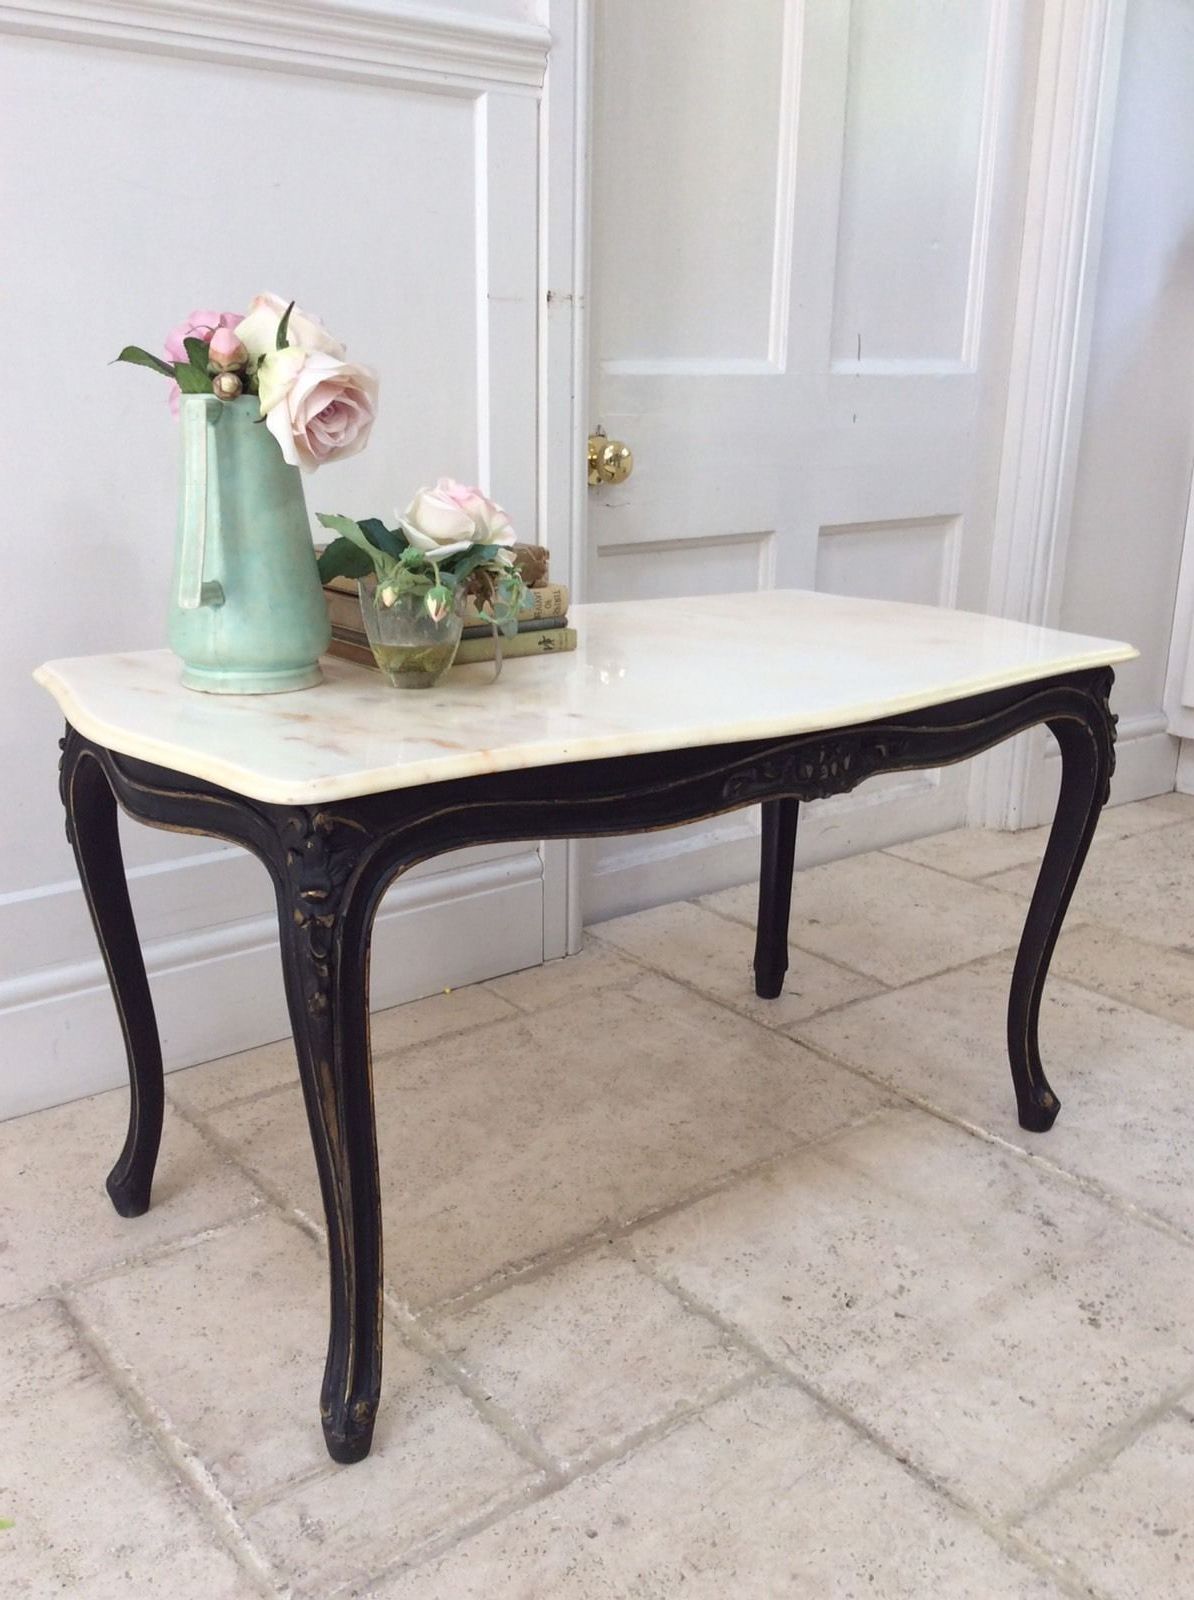 Vintage Black Gold Painted Marble Top Coffee Table French Style Within Latest Antique White Black Coffee Tables (View 6 of 10)